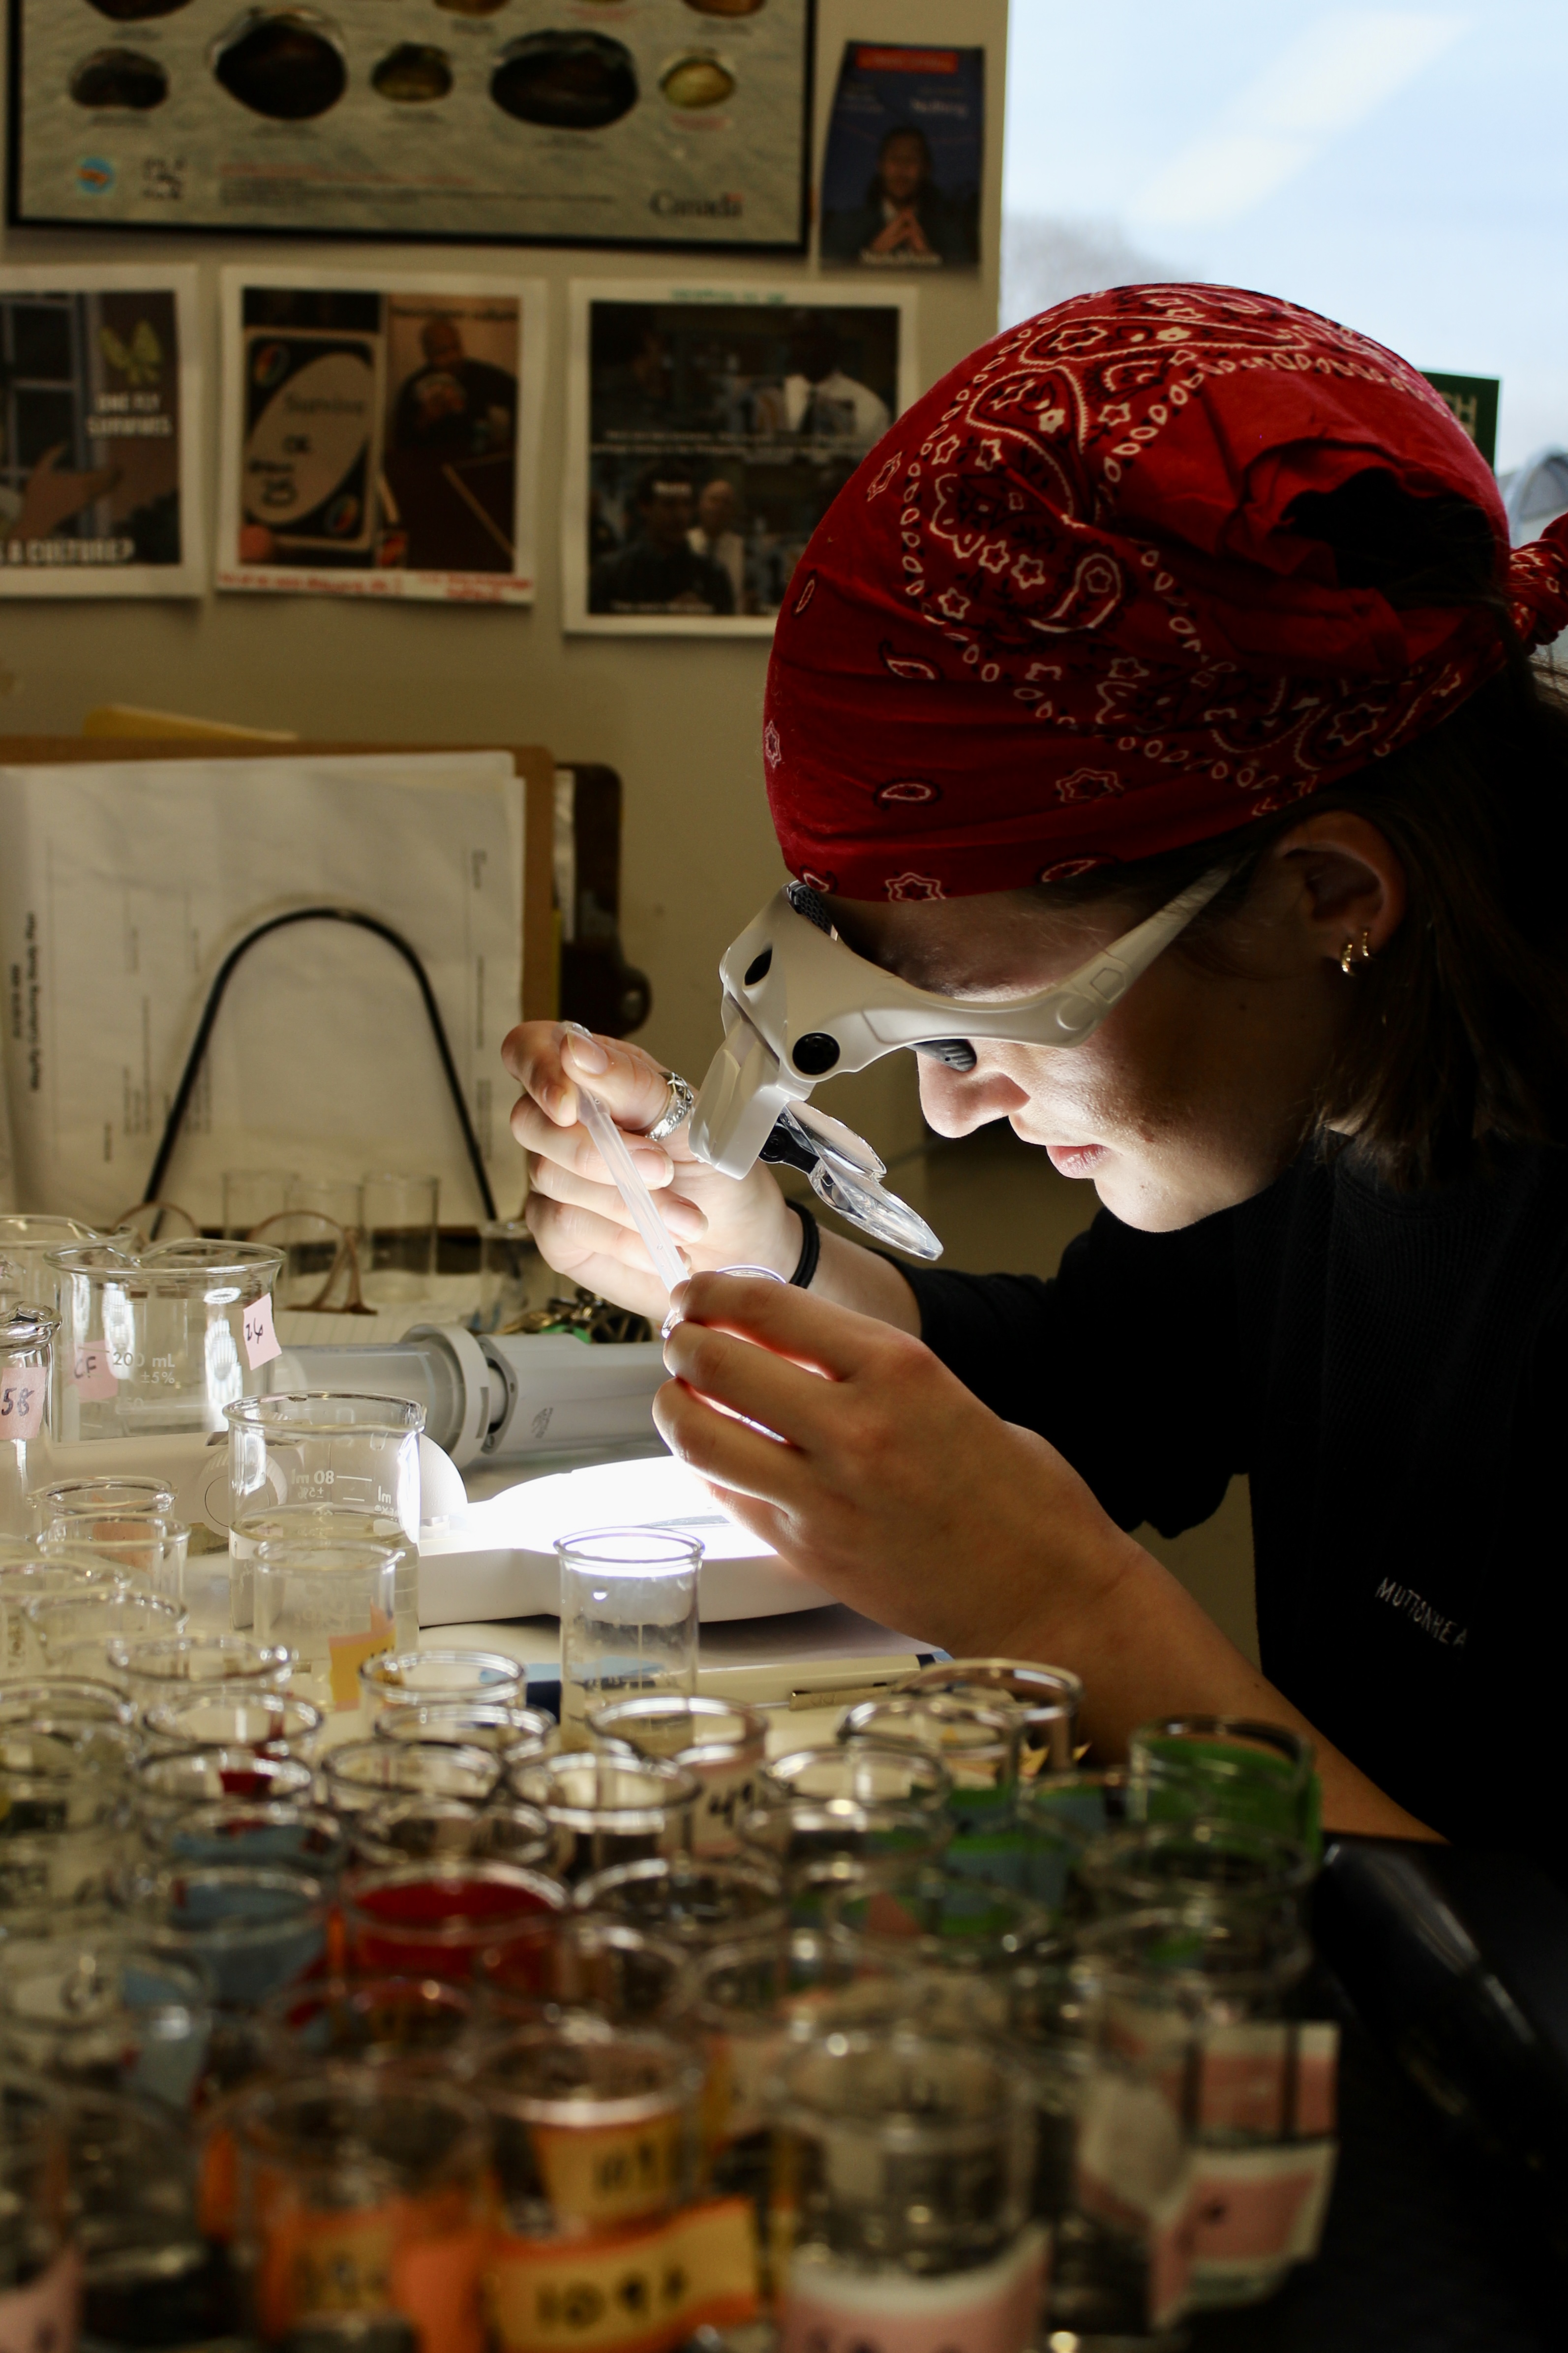 A woman wearing a bandana and eyewear for insect identification sitting at a table examining an insect.